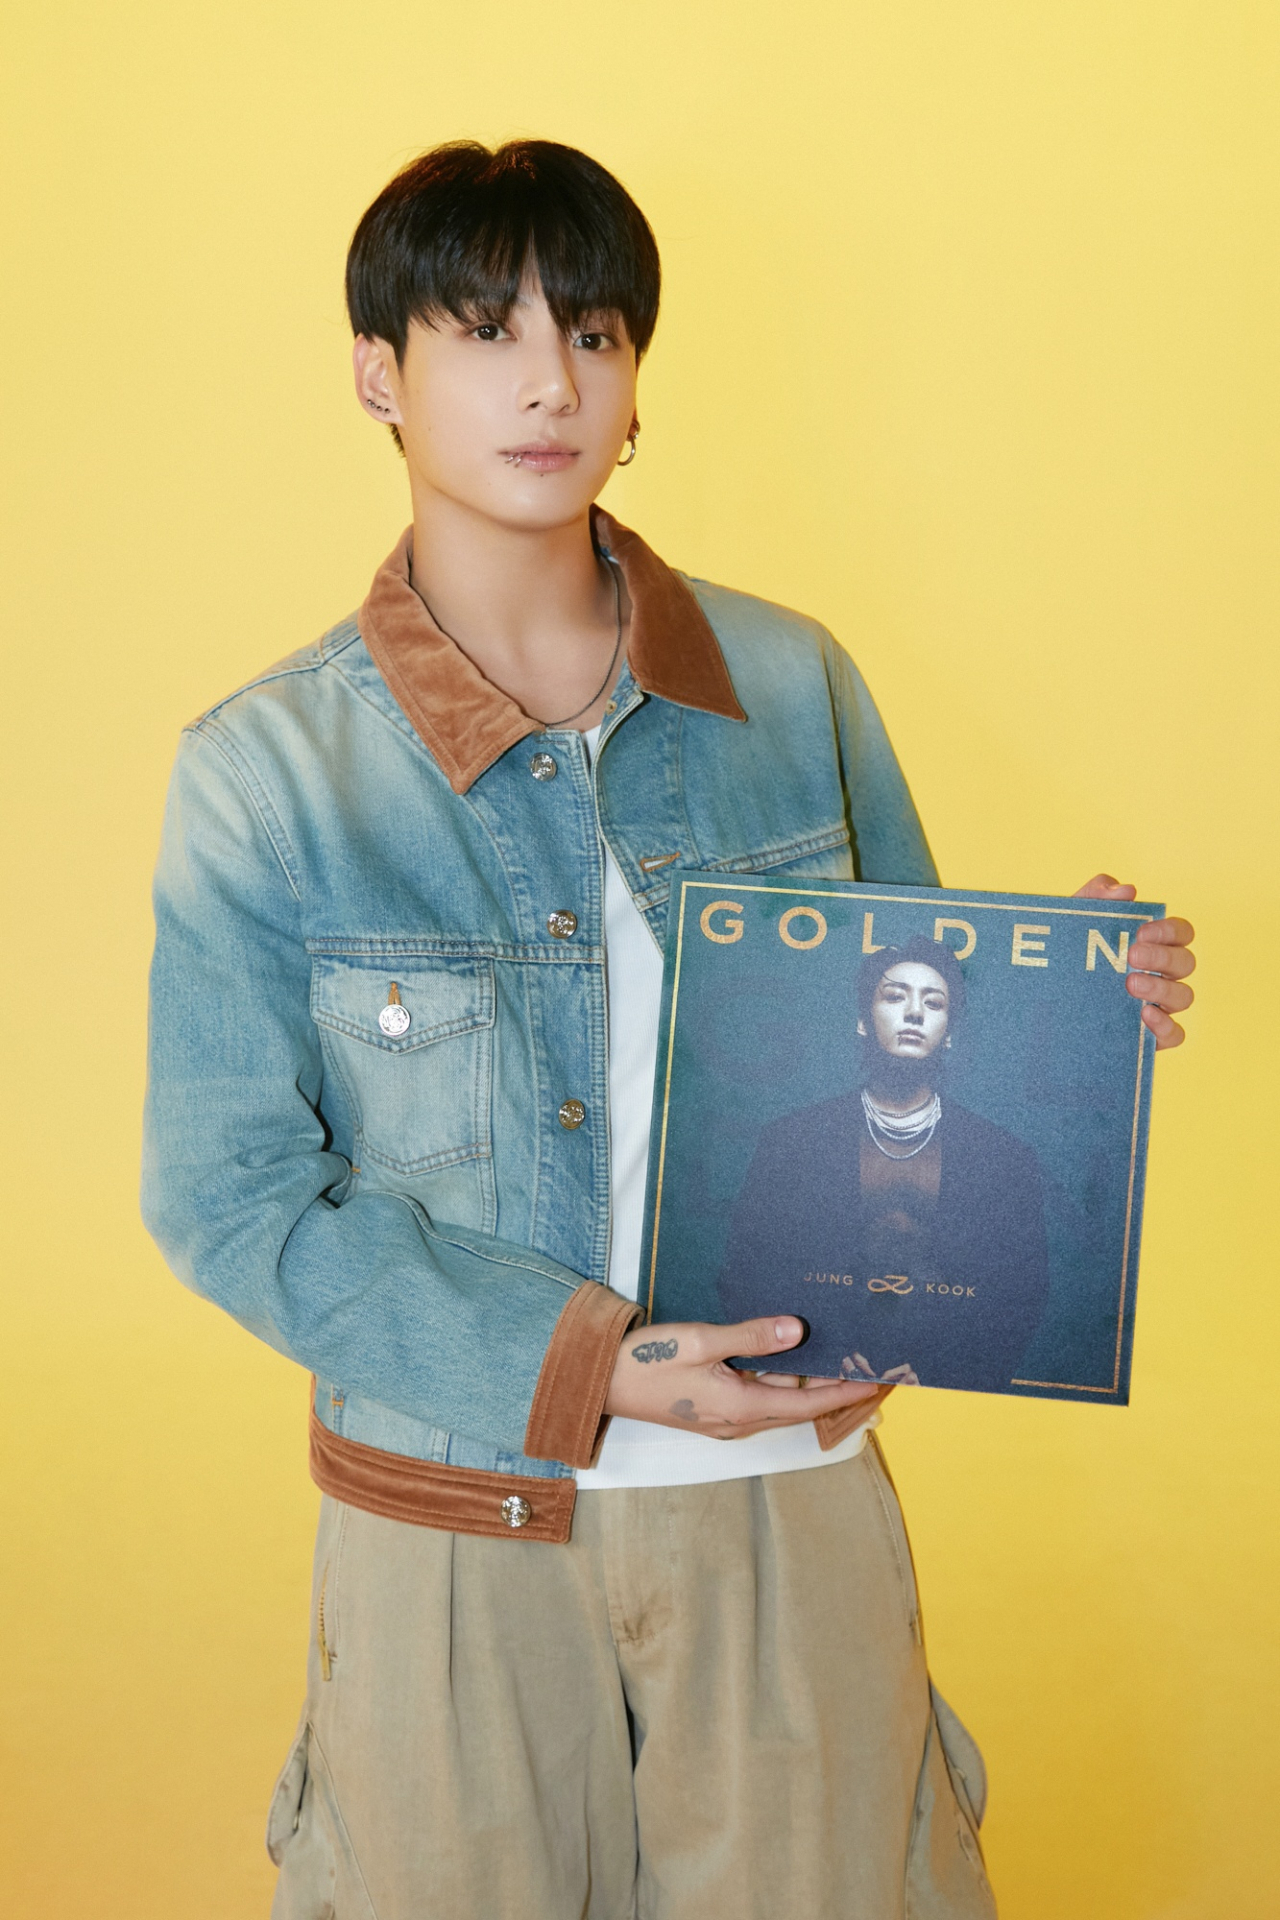 An image of BTS' Jungkook holding his first solo album 